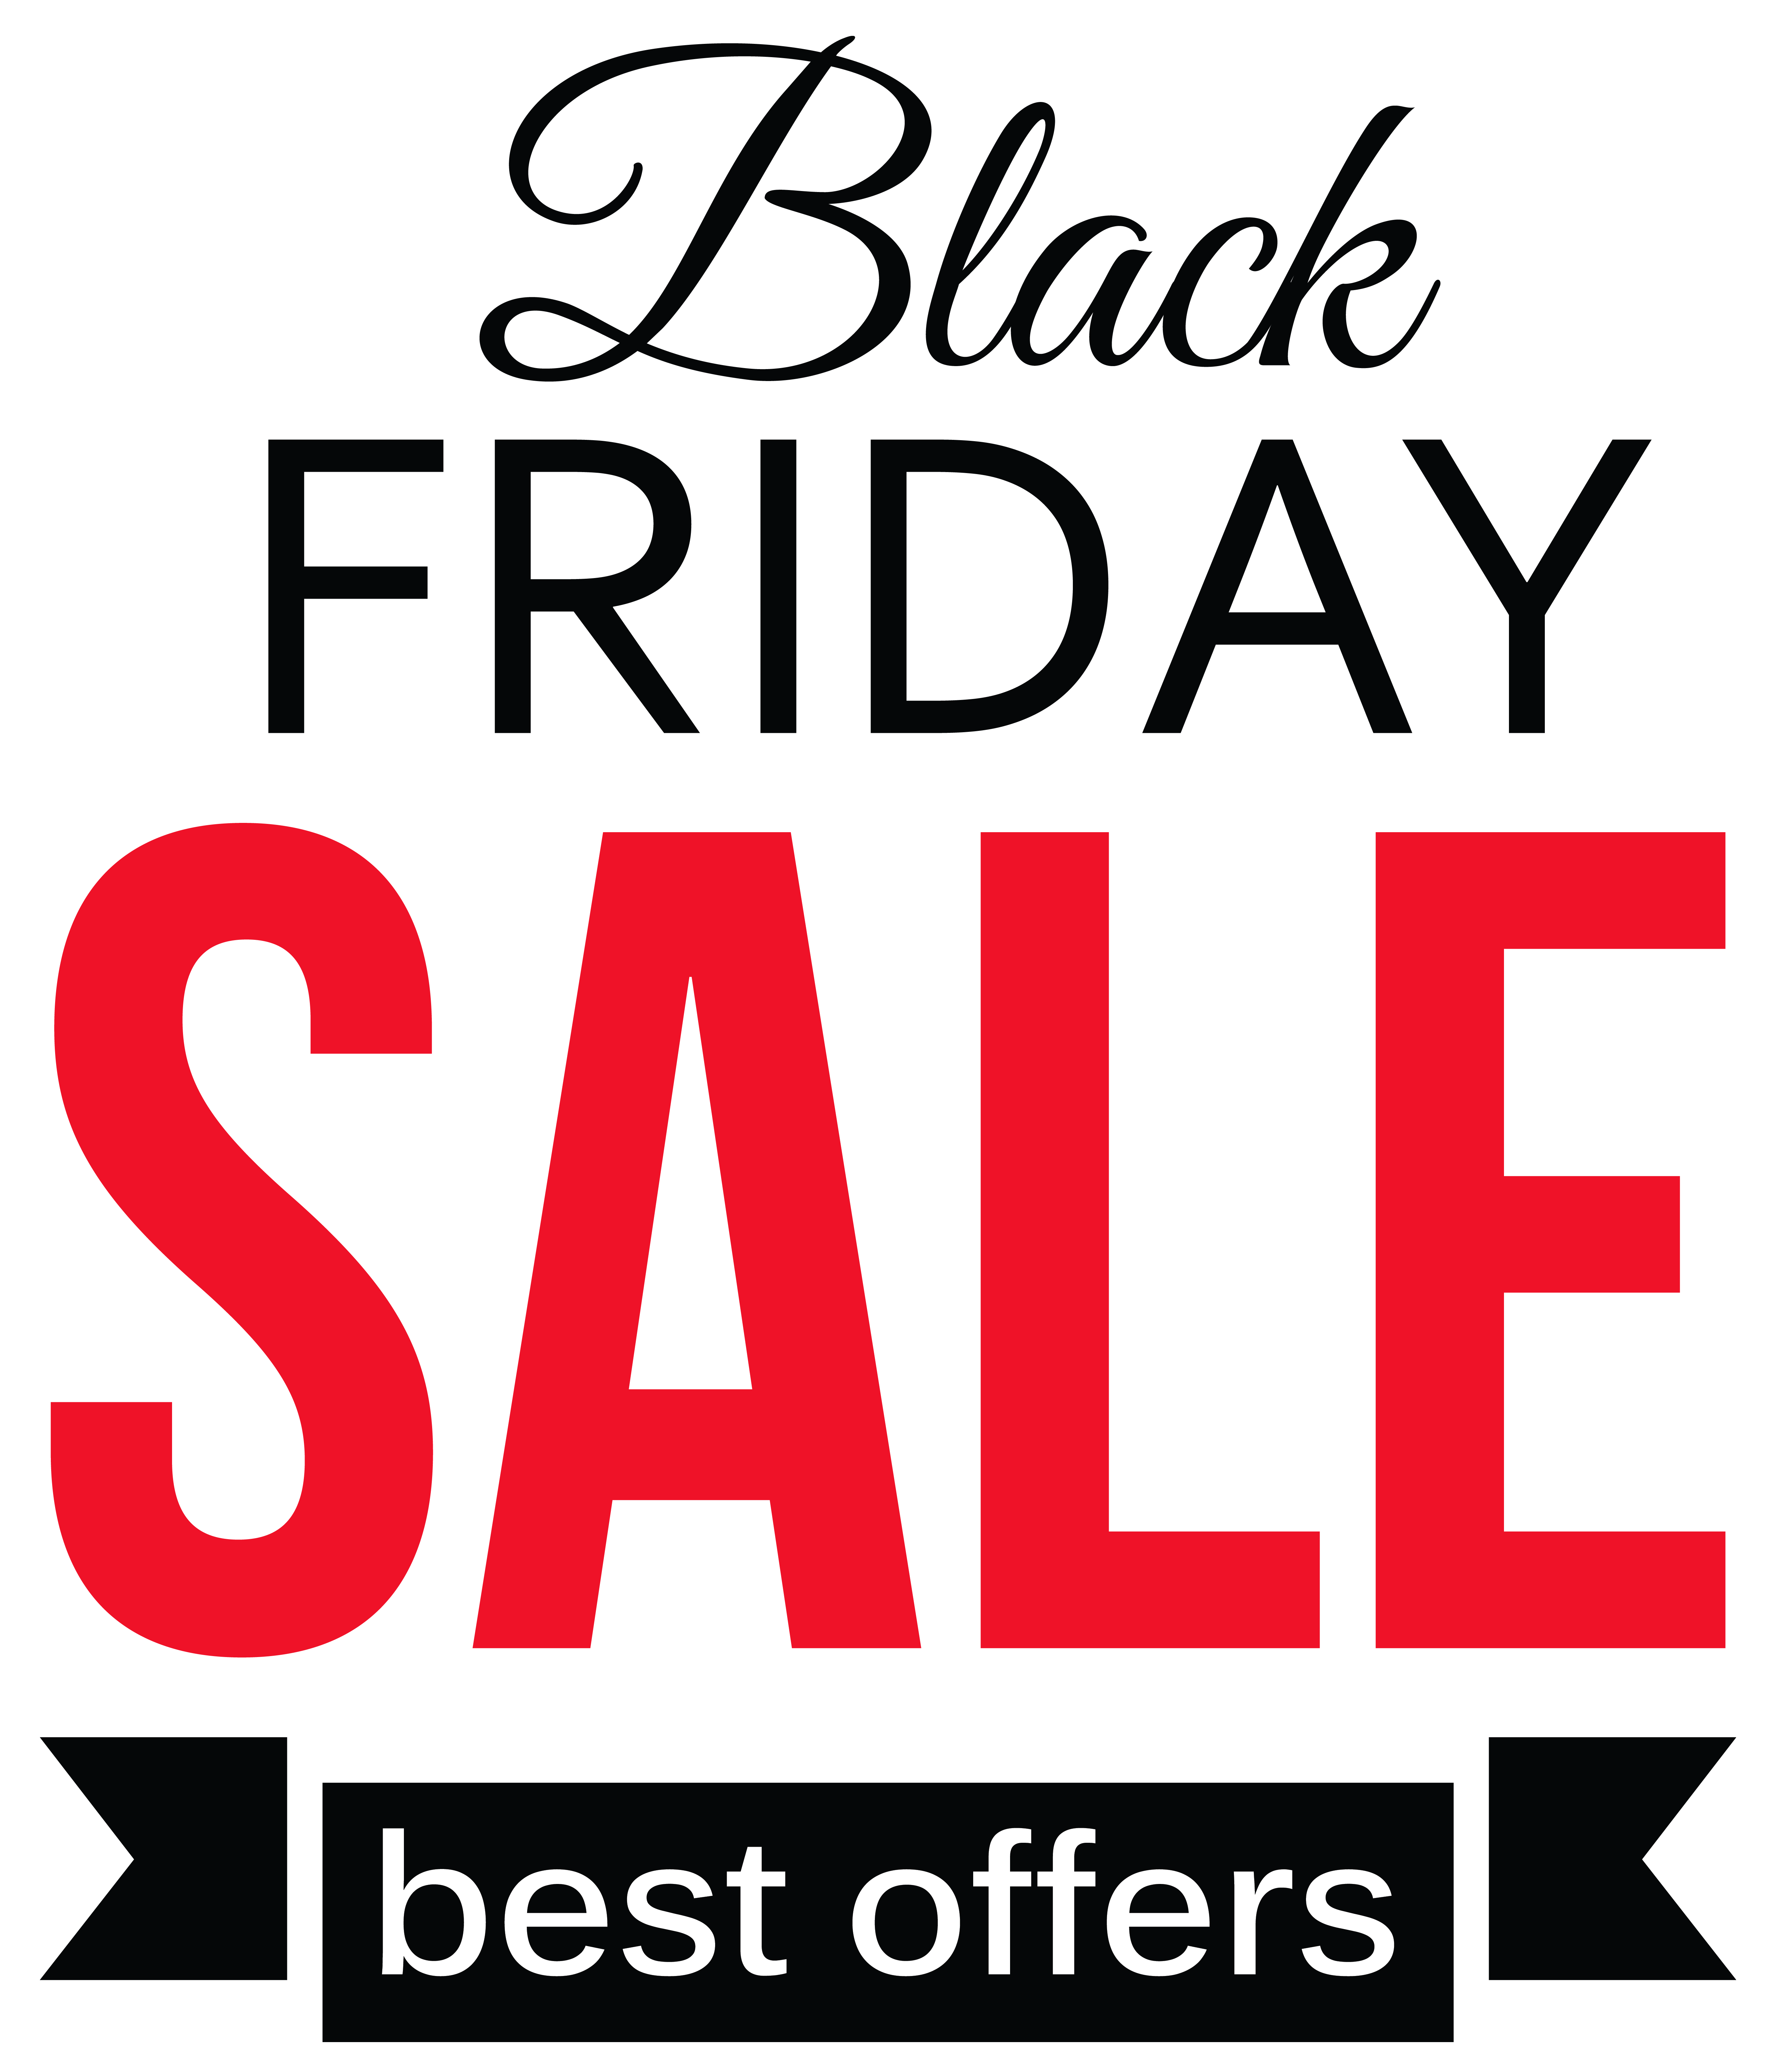 https://gallery.yopriceville.com/var/albums/Free-Clipart-Pictures/Black-Friday-PNG/Black_Friday_Sale_Clipart_PNG_Picture.png?m=1438656901